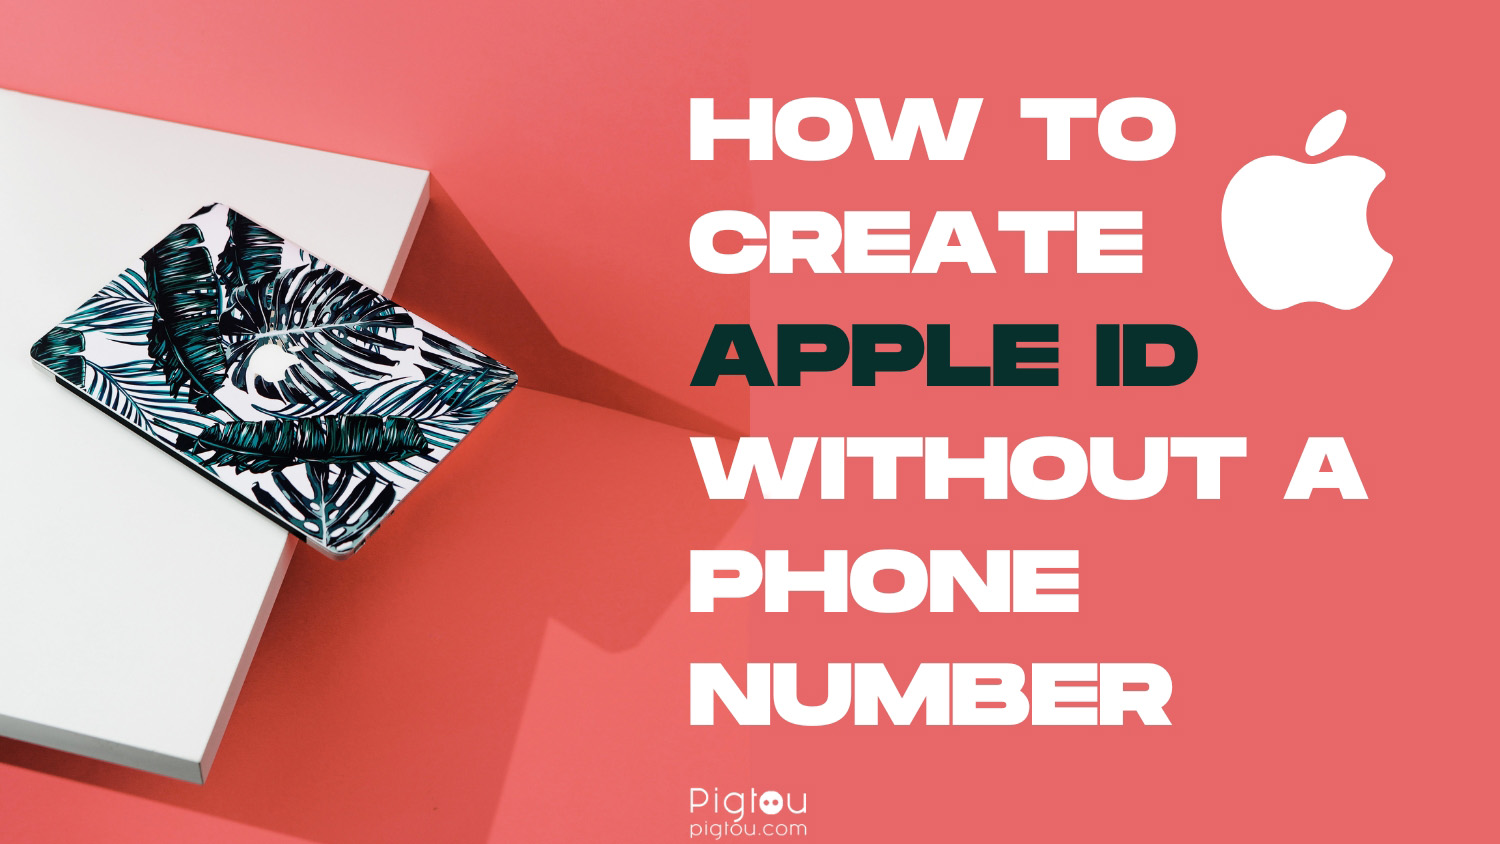 How To Create Apple ID Without a Phone Number [EXPLAINED]